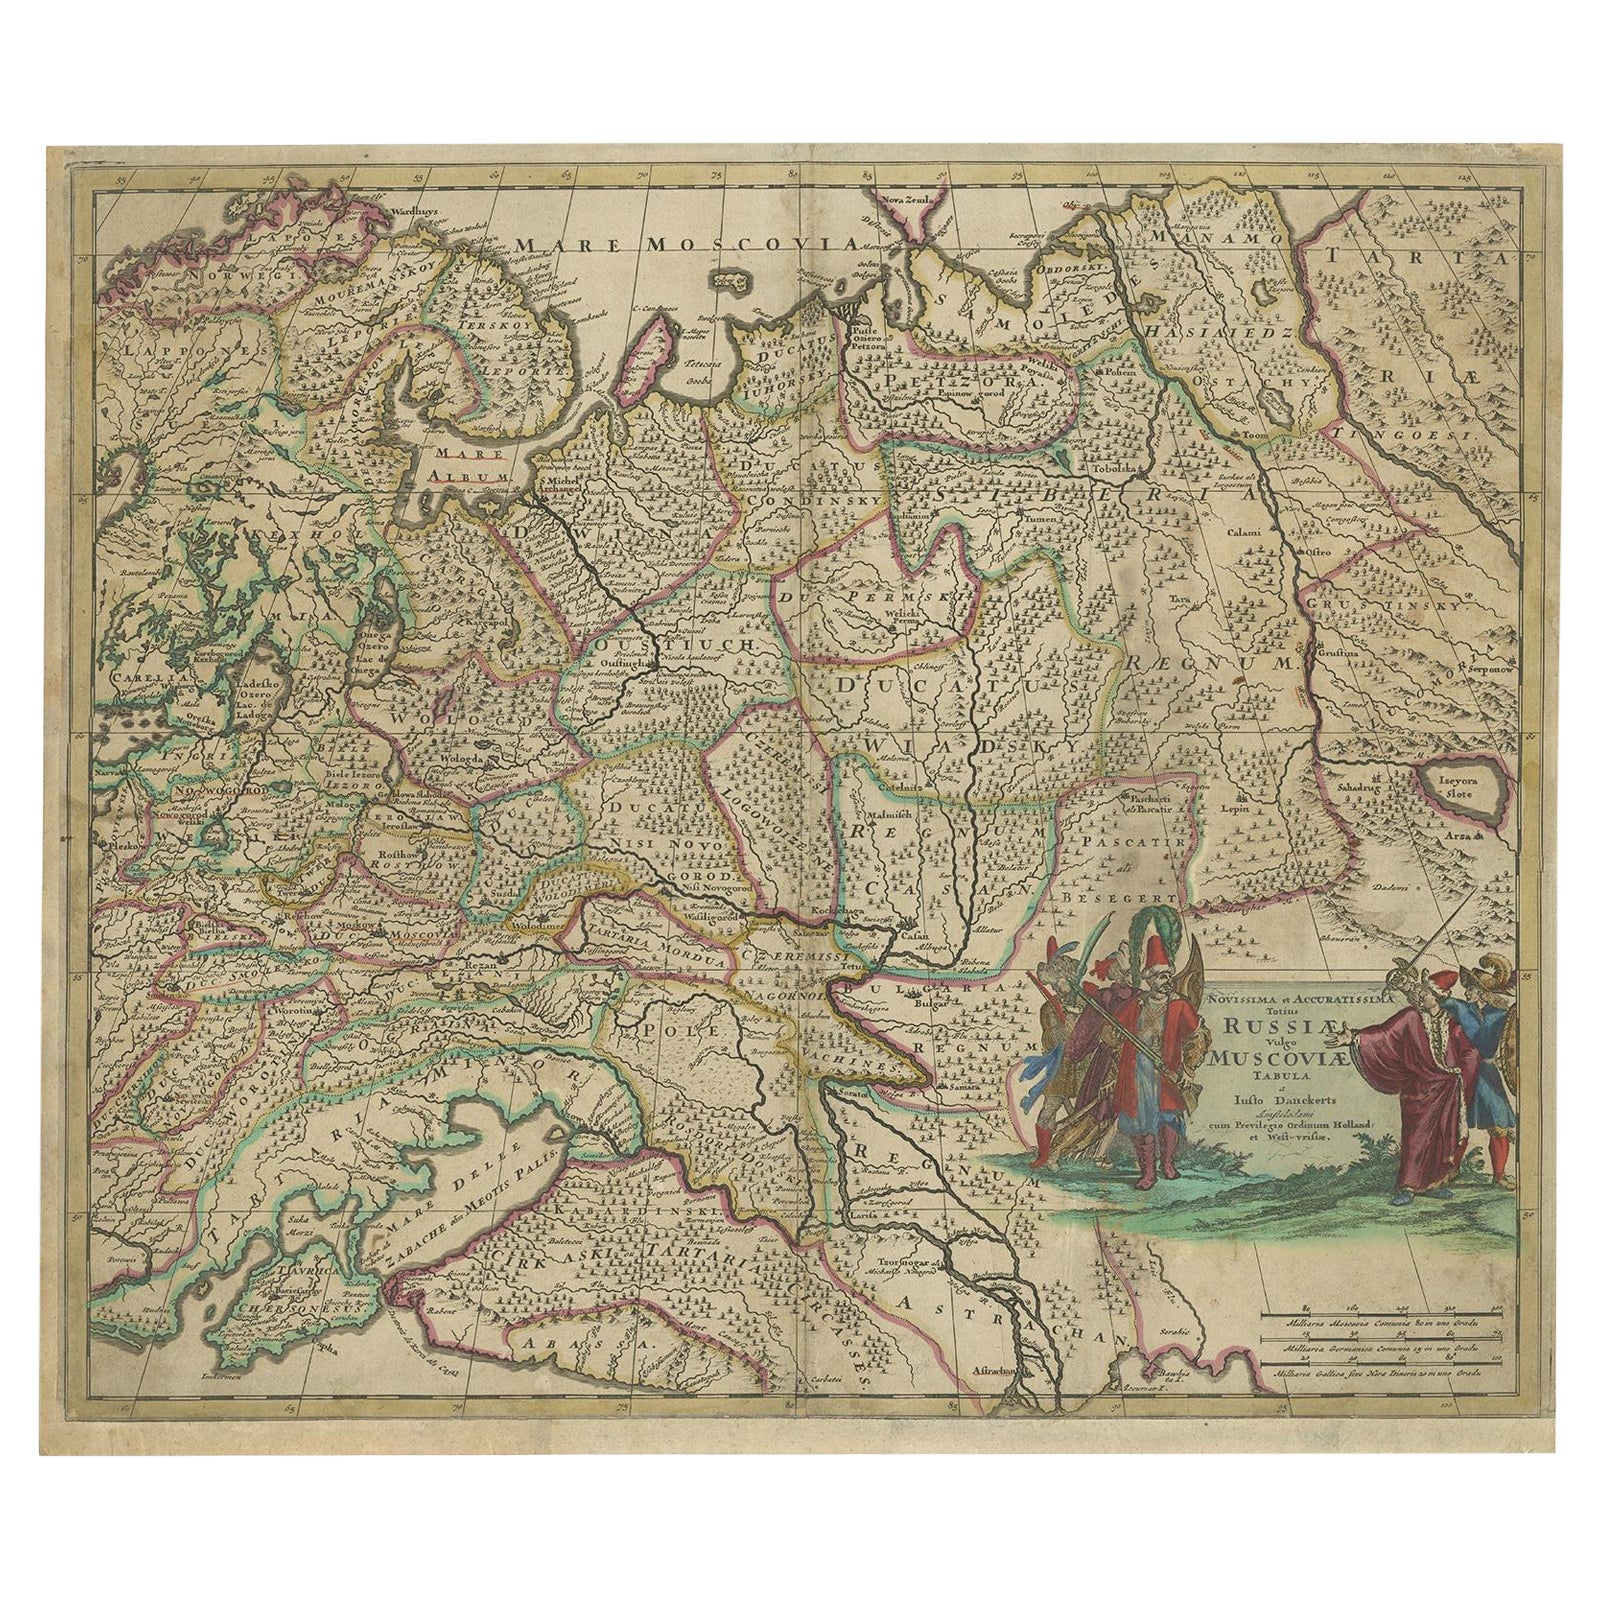 Antique Hand-Colored Map of Western Russia and Ukraine, c.1680